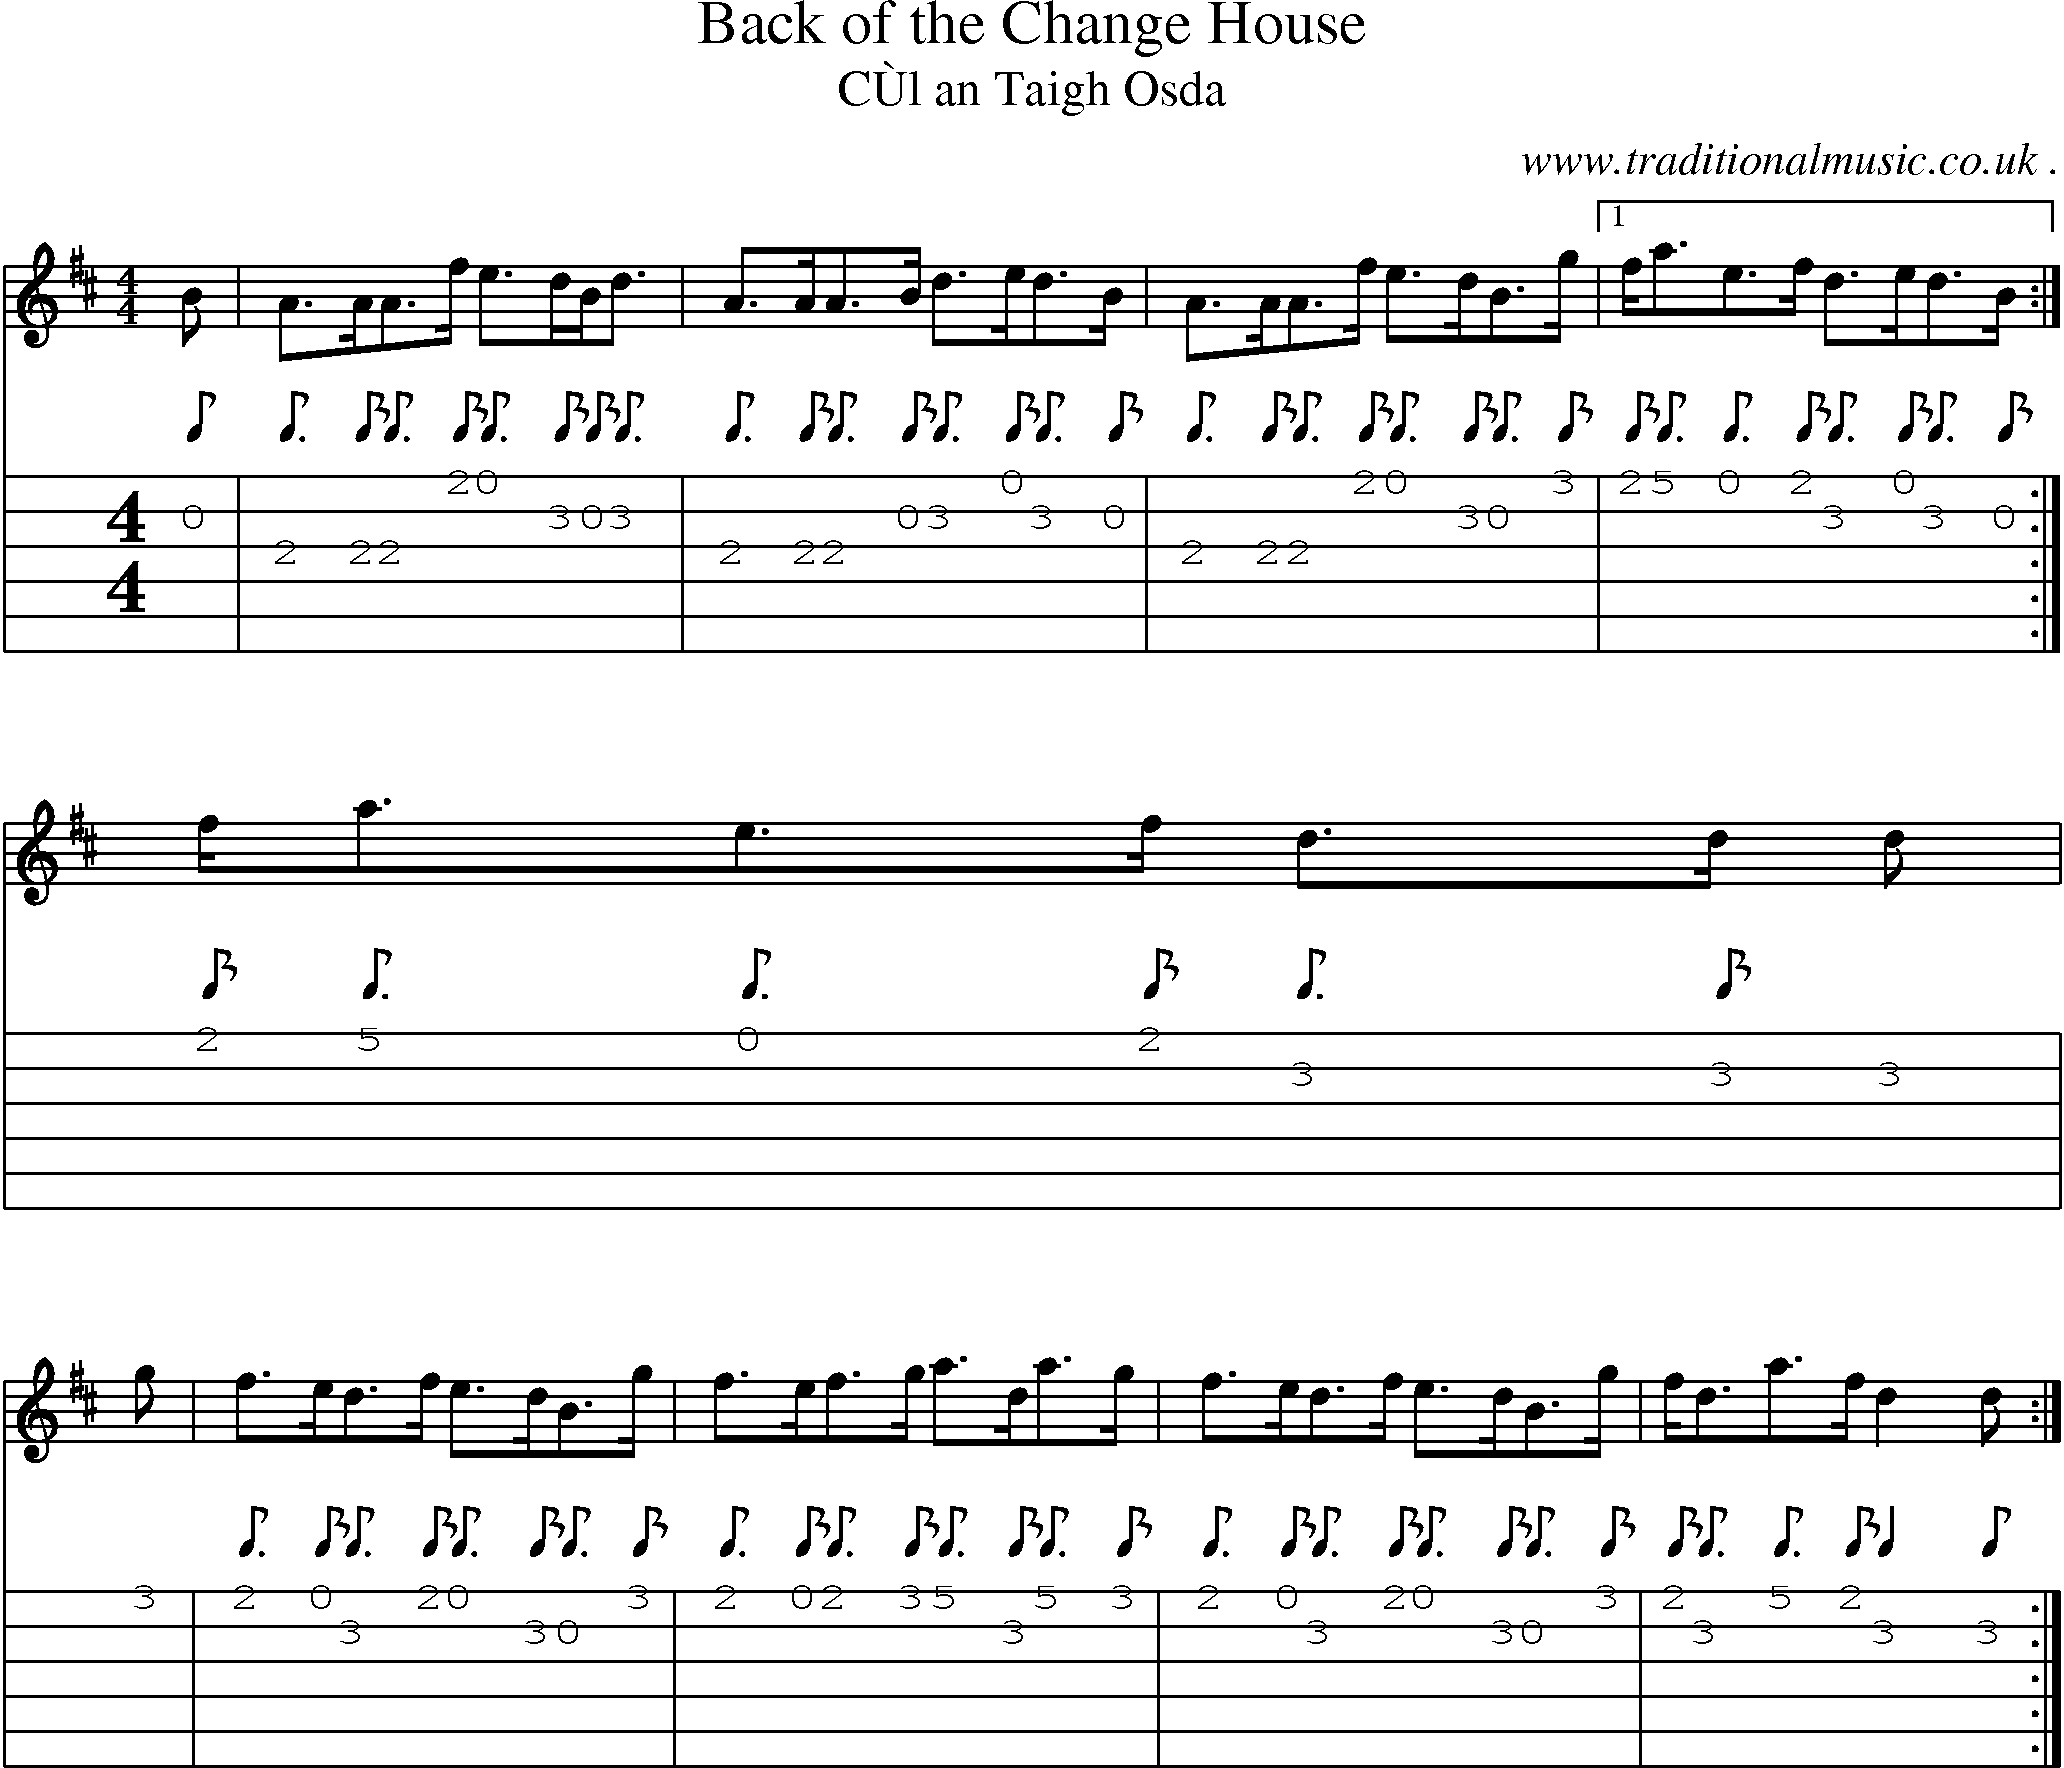 Sheet-music  score, Chords and Guitar Tabs for Back Of The Change House